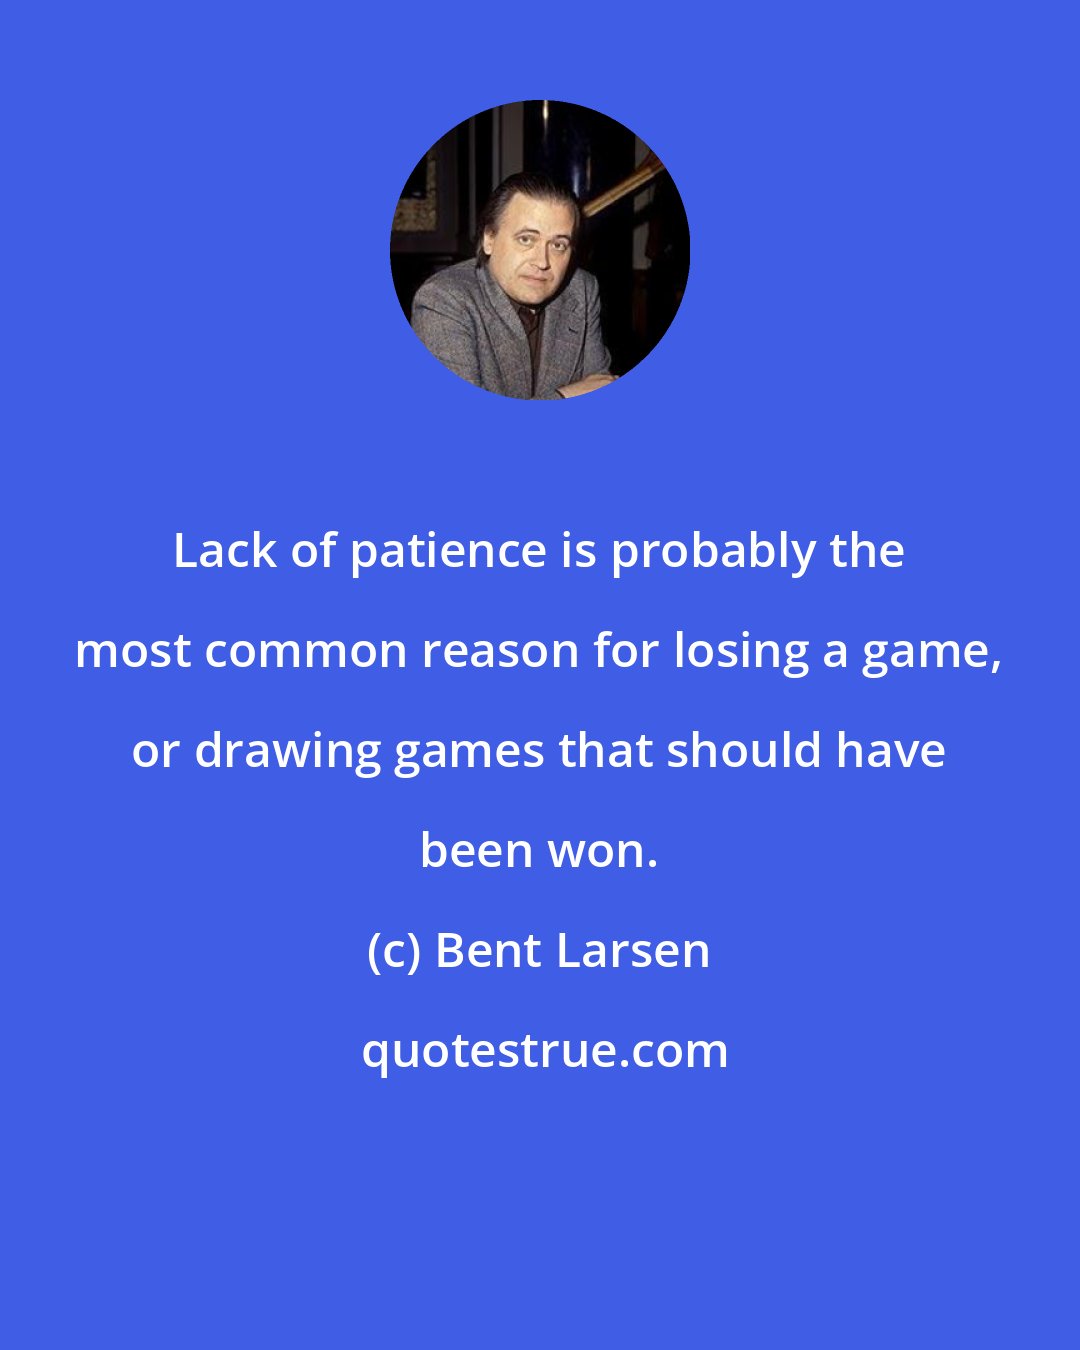 Bent Larsen: Lack of patience is probably the most common reason for losing a game, or drawing games that should have been won.